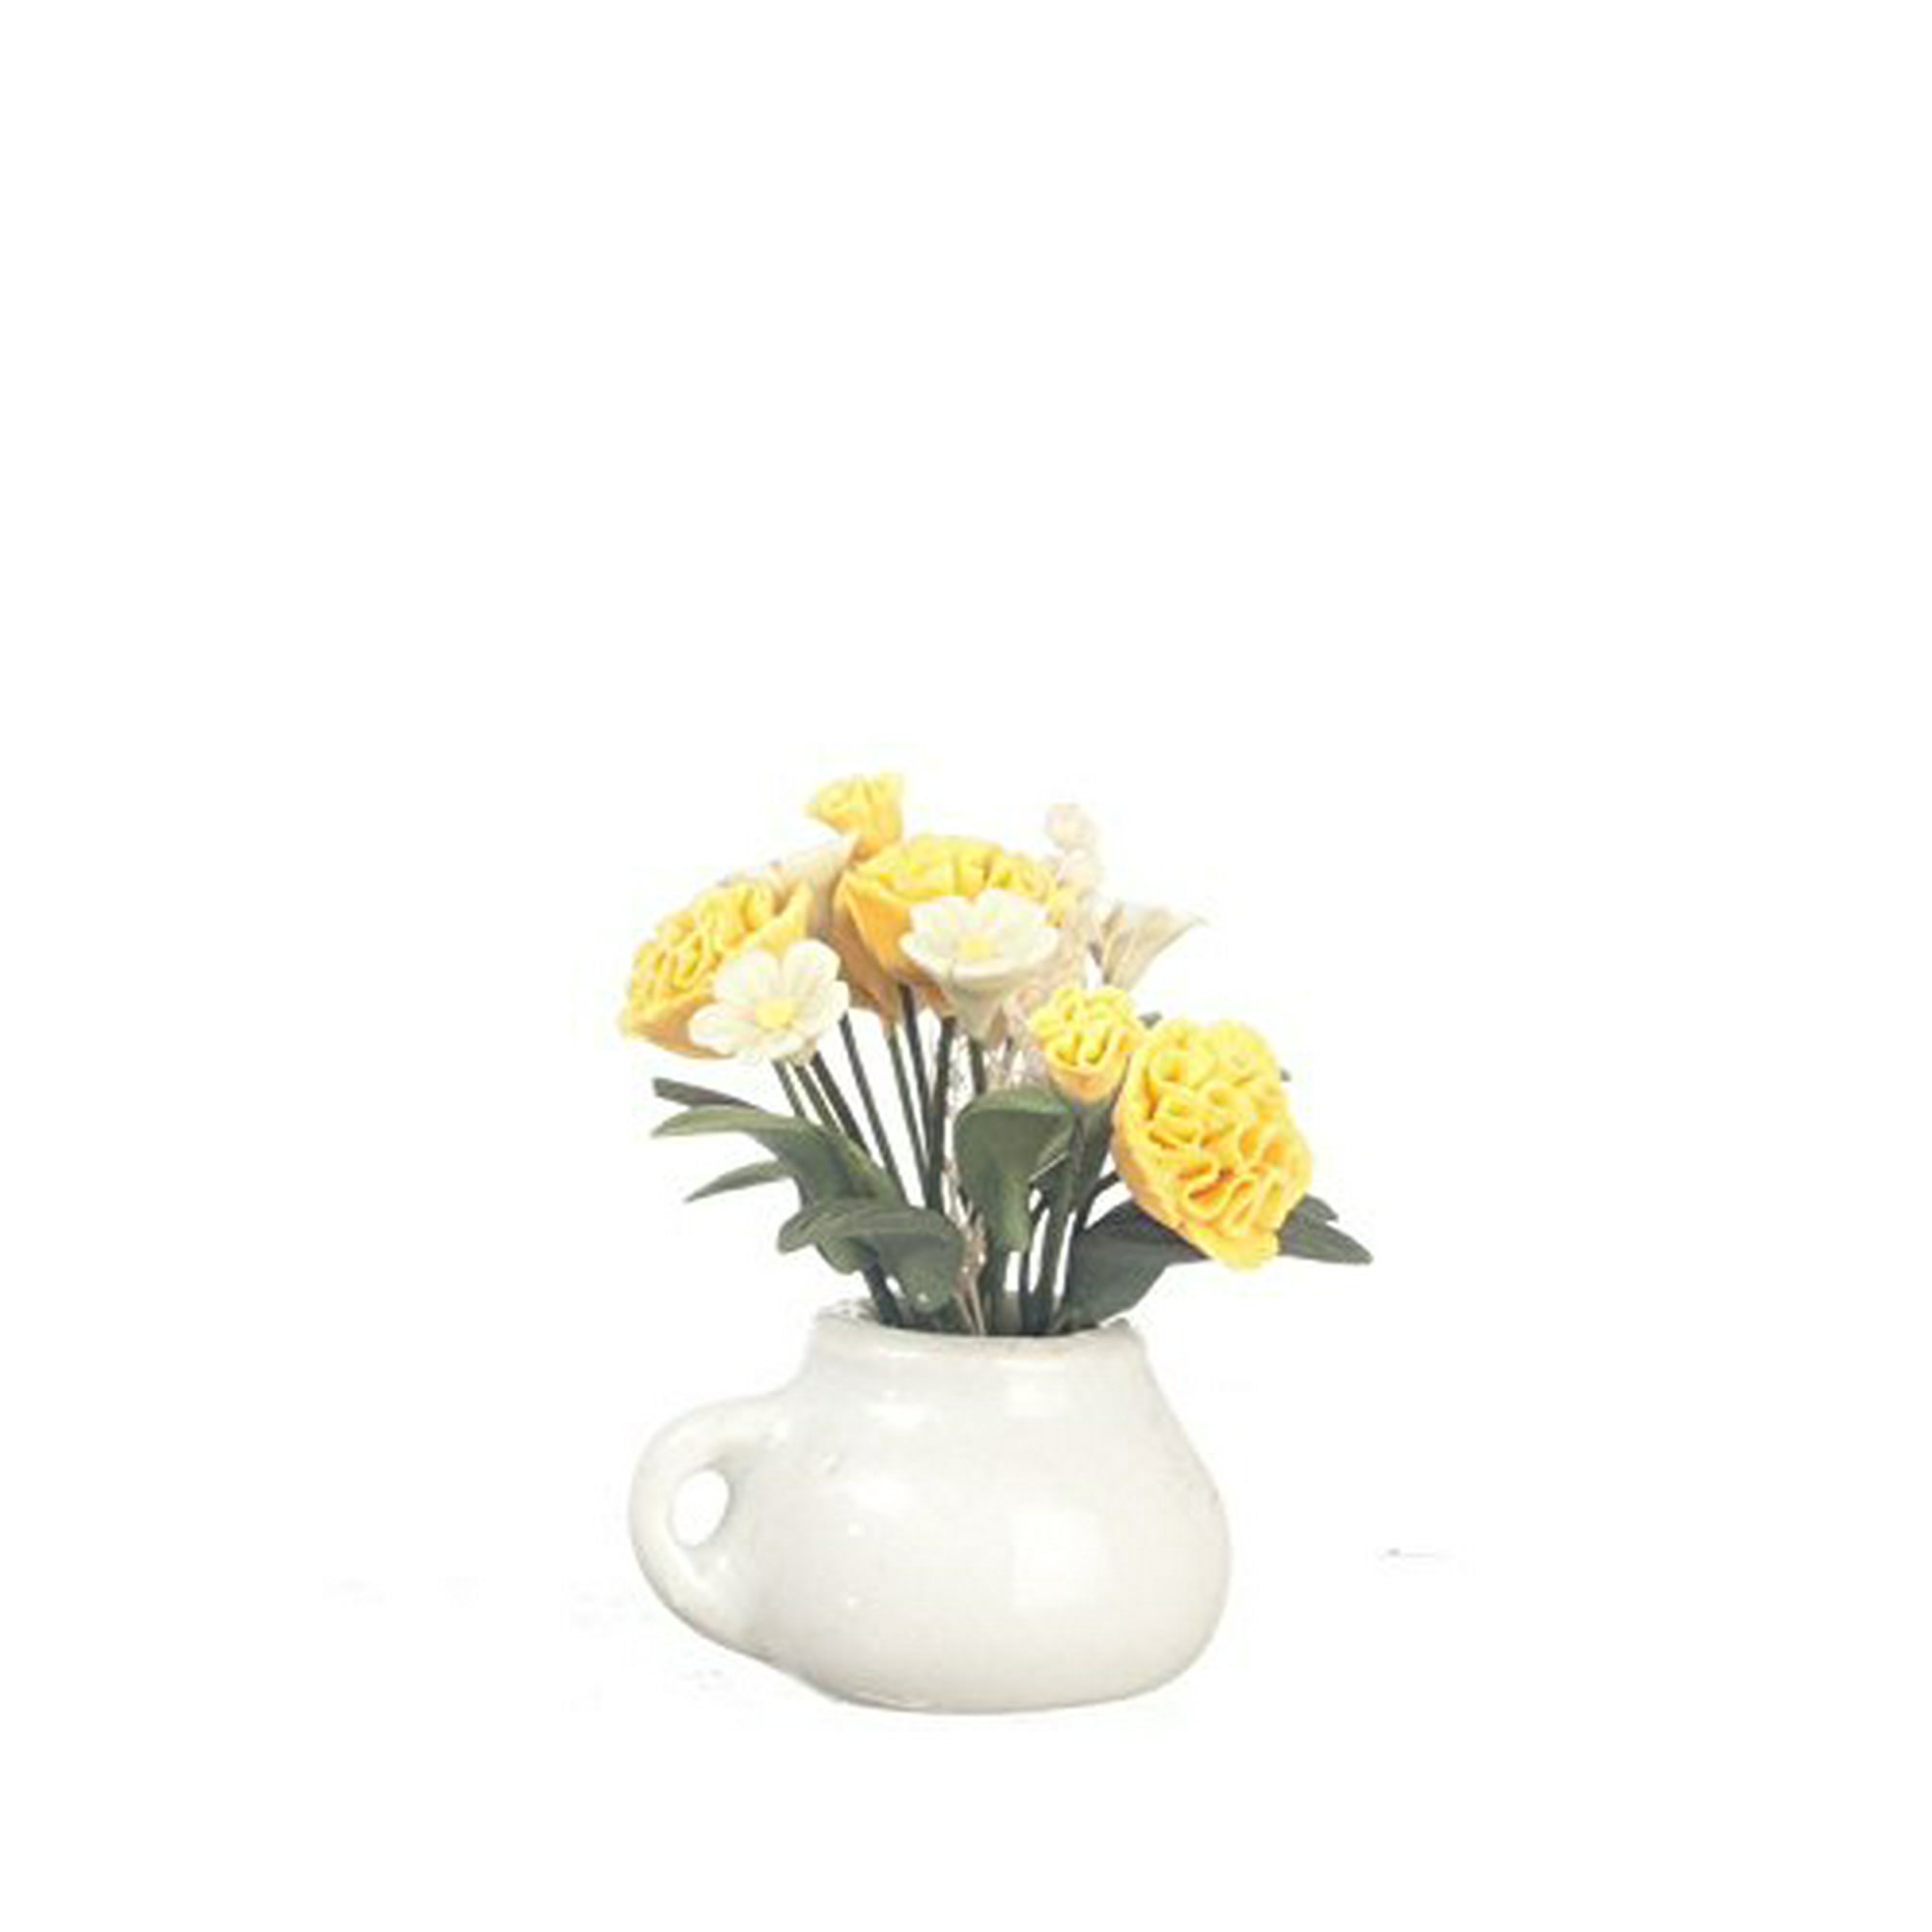 Dollhouse Miniature 1:12 Scale Yellow Roses and Daisies in Teacup #Rp0063 Town square 